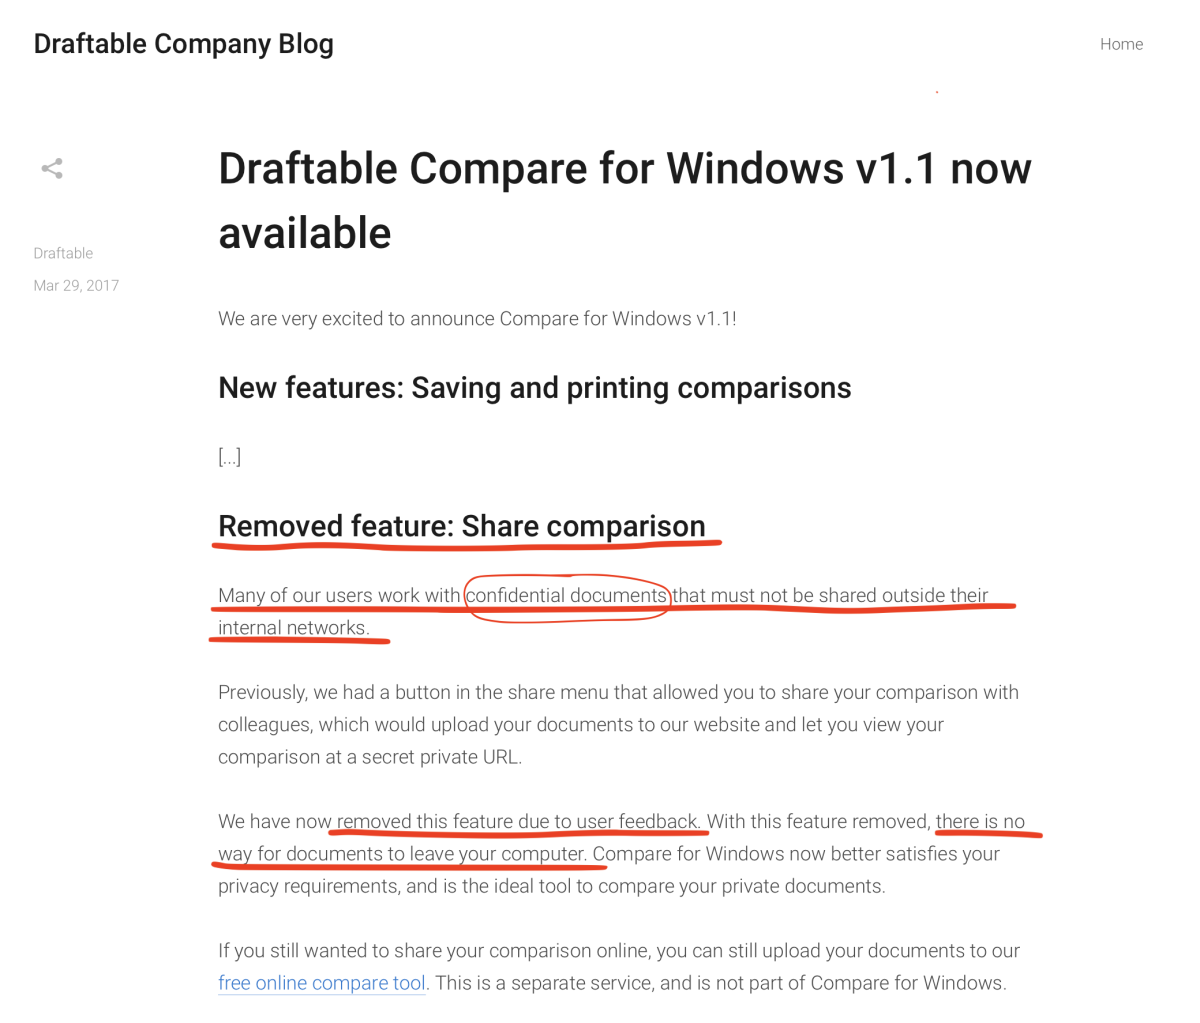 Draftable Compare entfernt Sharing